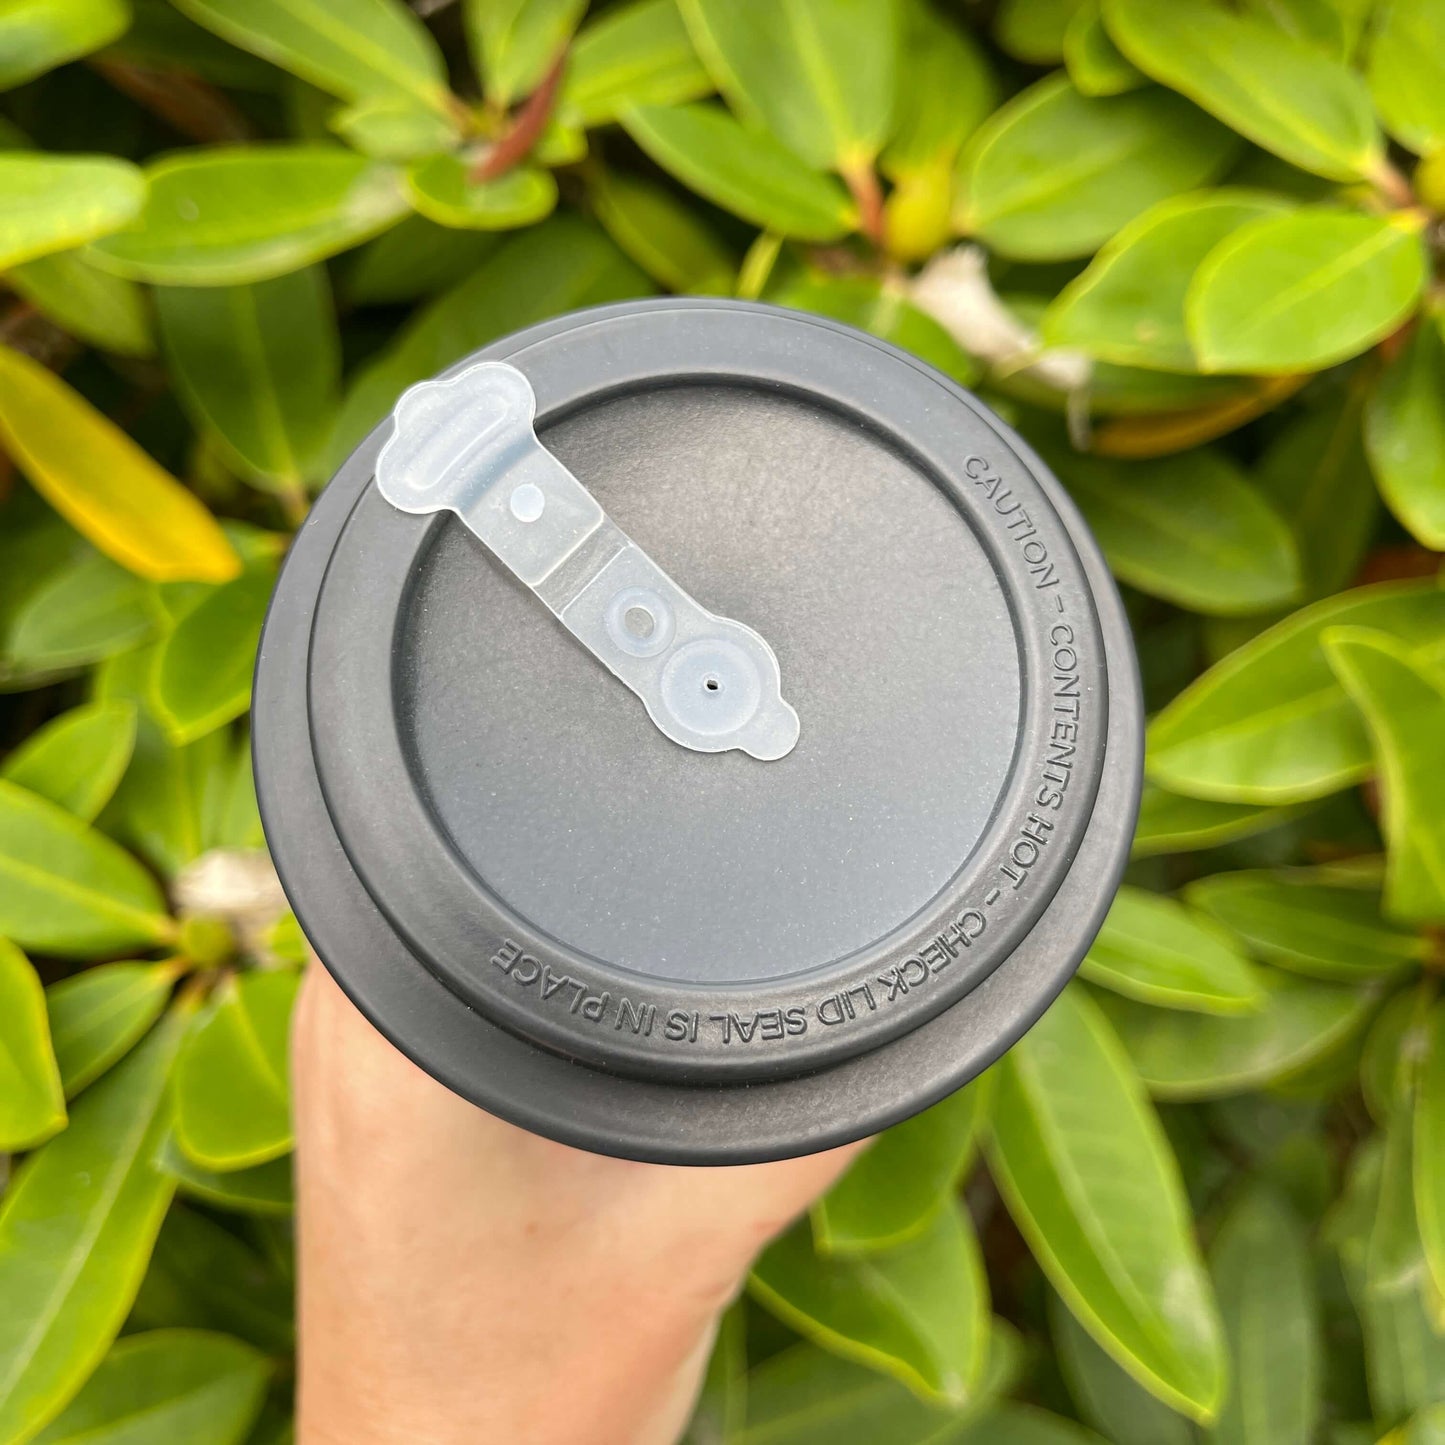 Birds eye view of reusable coffee cup showing the lid and sipper top area.